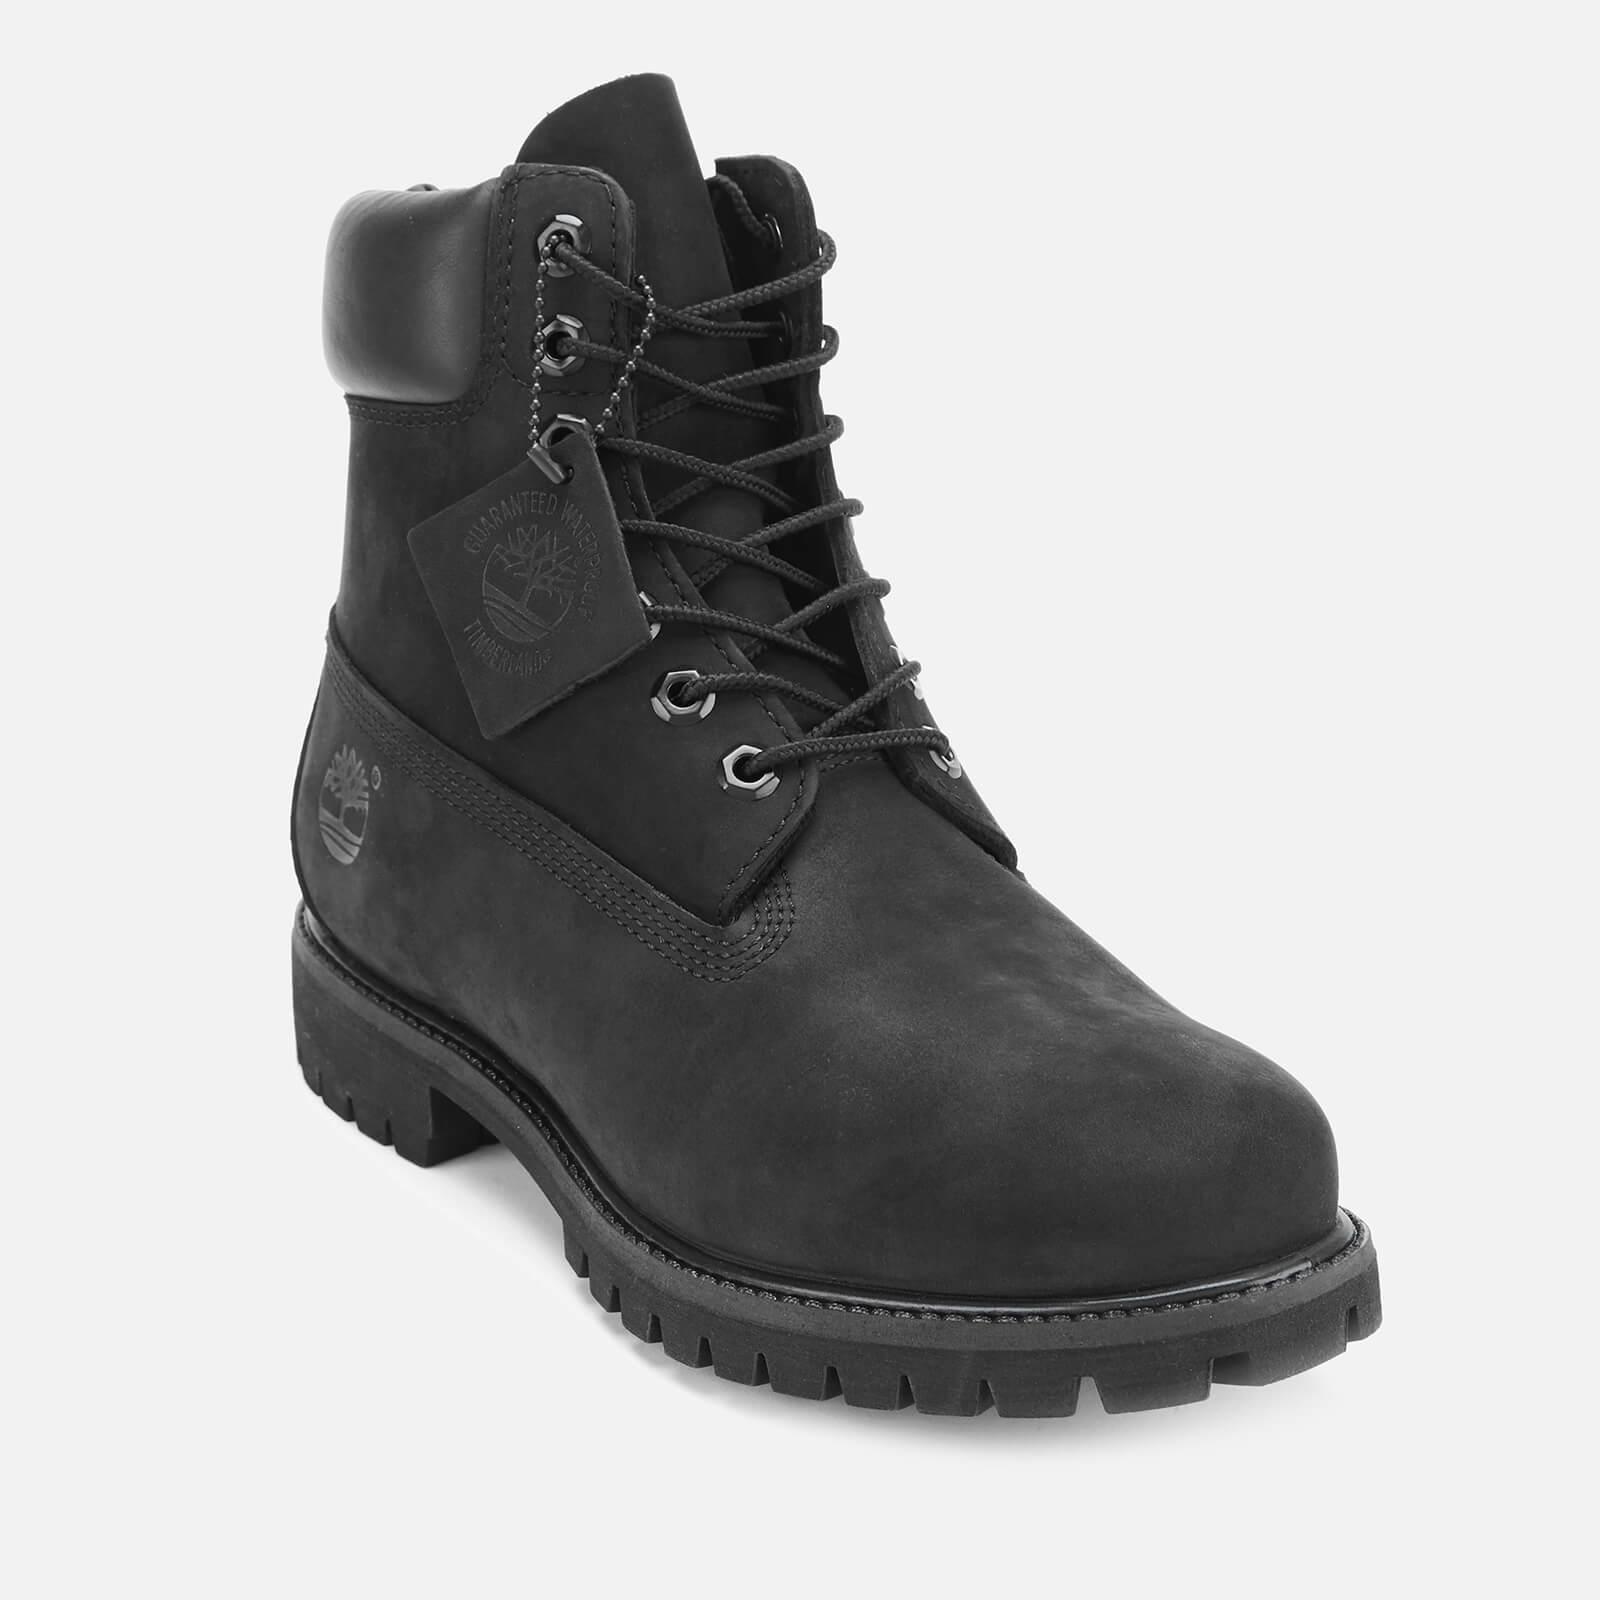 Timberland 6 Inch Premium Waterproof Boots in Black for Men - Lyst